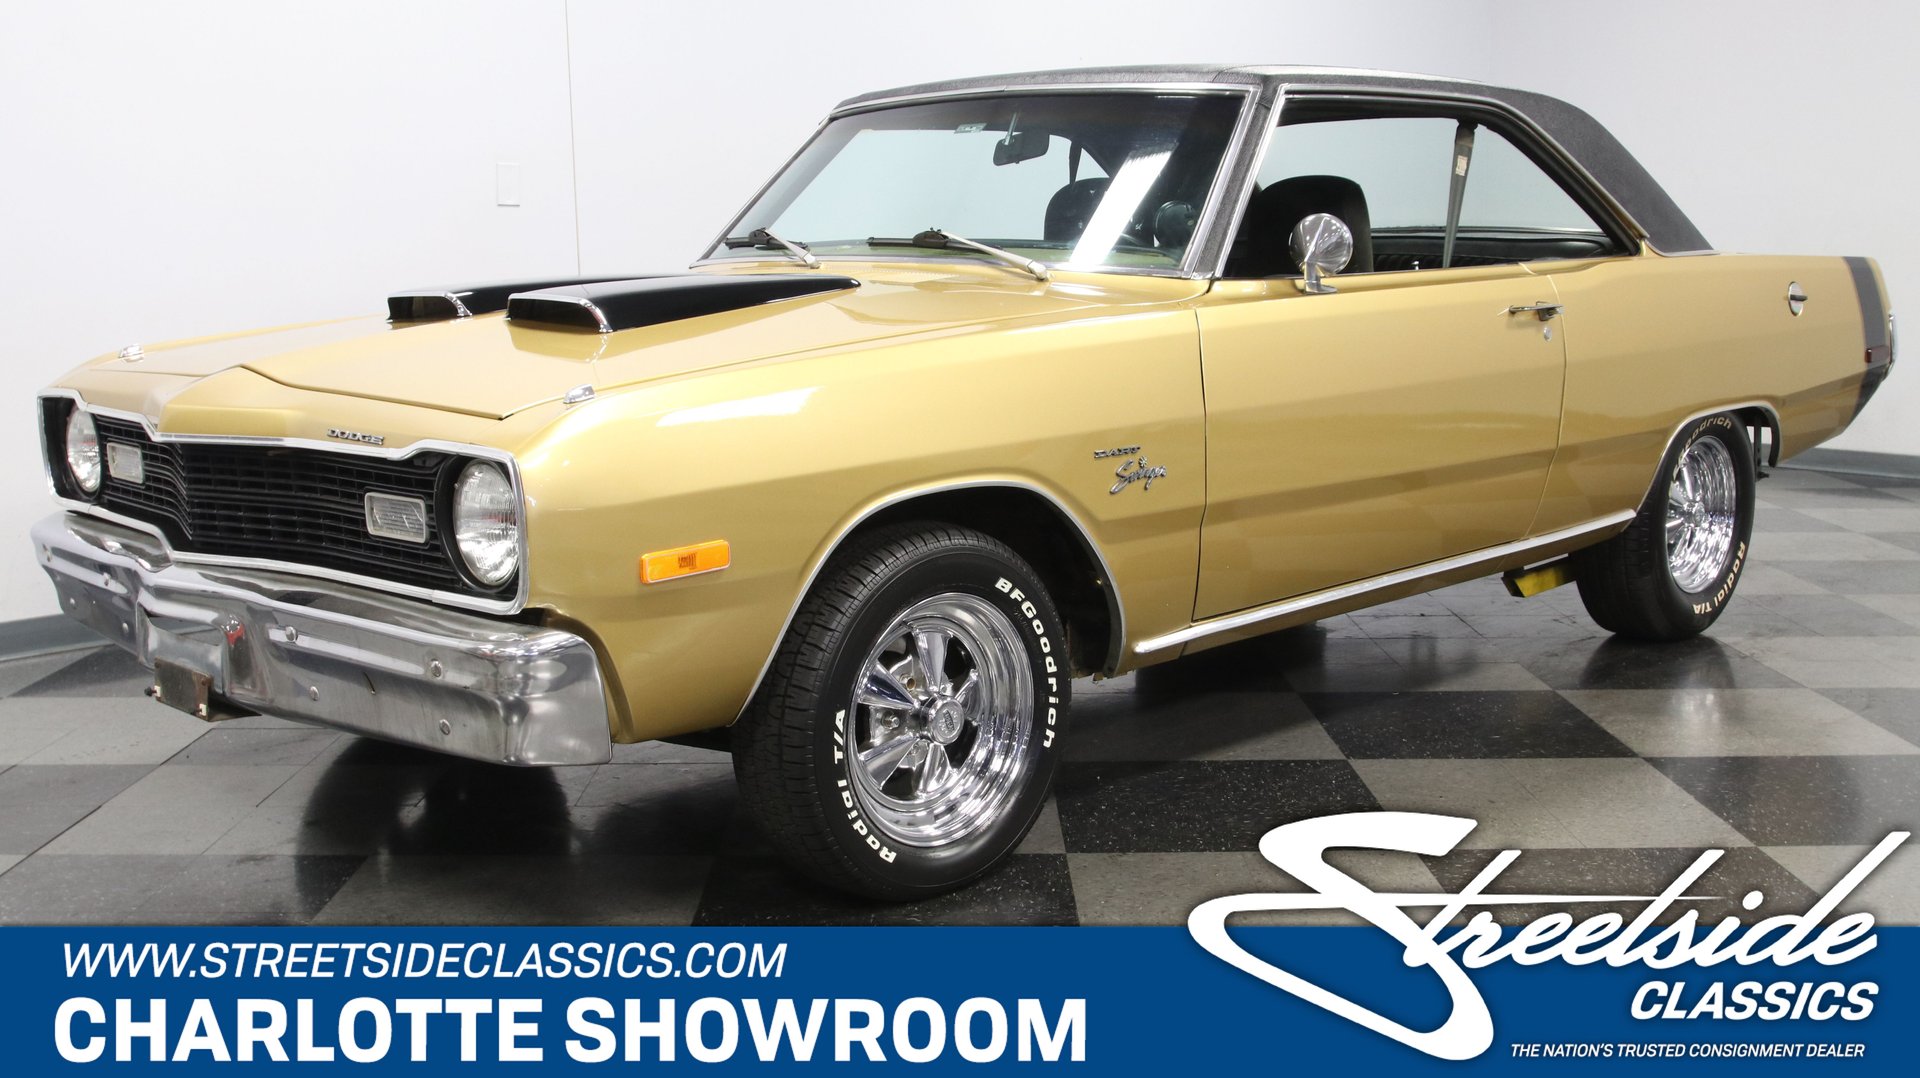 1973 Dodge Dart Classic Cars for Sale pic